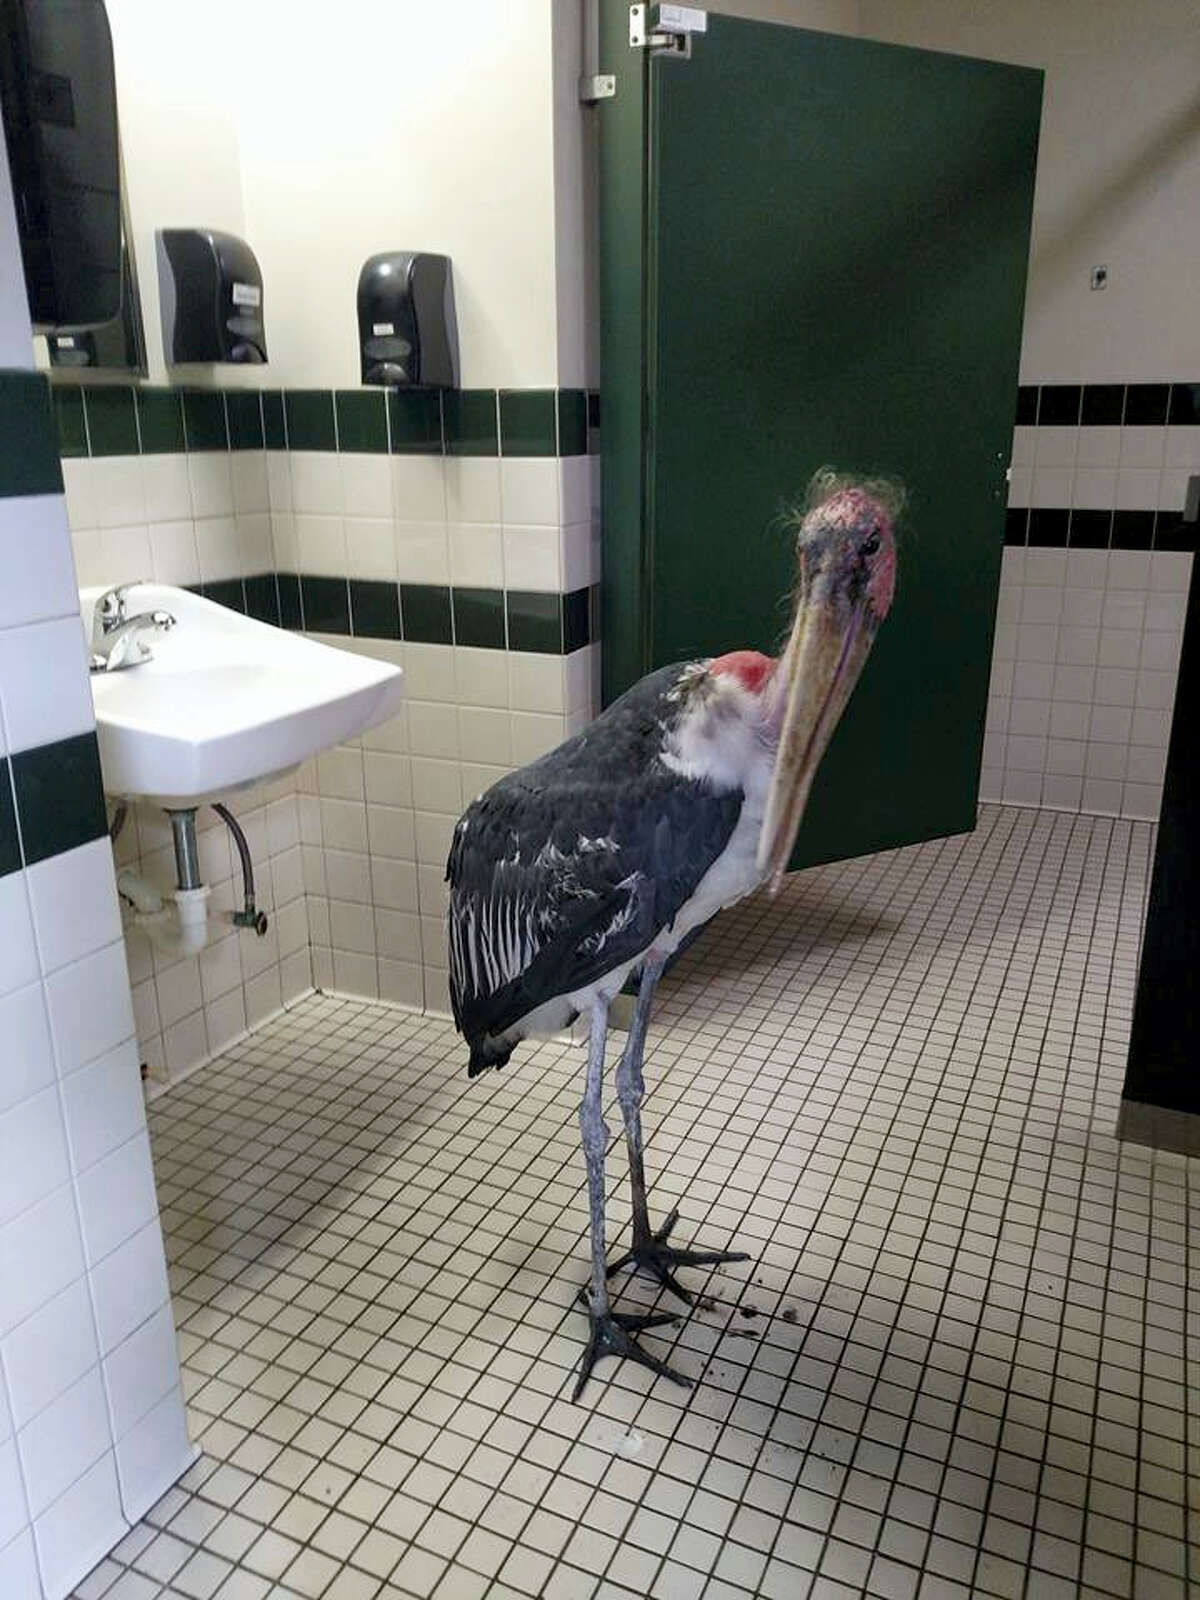 This Oct. 6, 2016, photo provided by the St. Augustine Alligator Farm and Zoological Park shows a marabou stork in a restroom at the facility in St. Augustine, Fla. The zoo said it moved all of its birds and mammals inside ahead of Hurricane Matthew’s arrival.